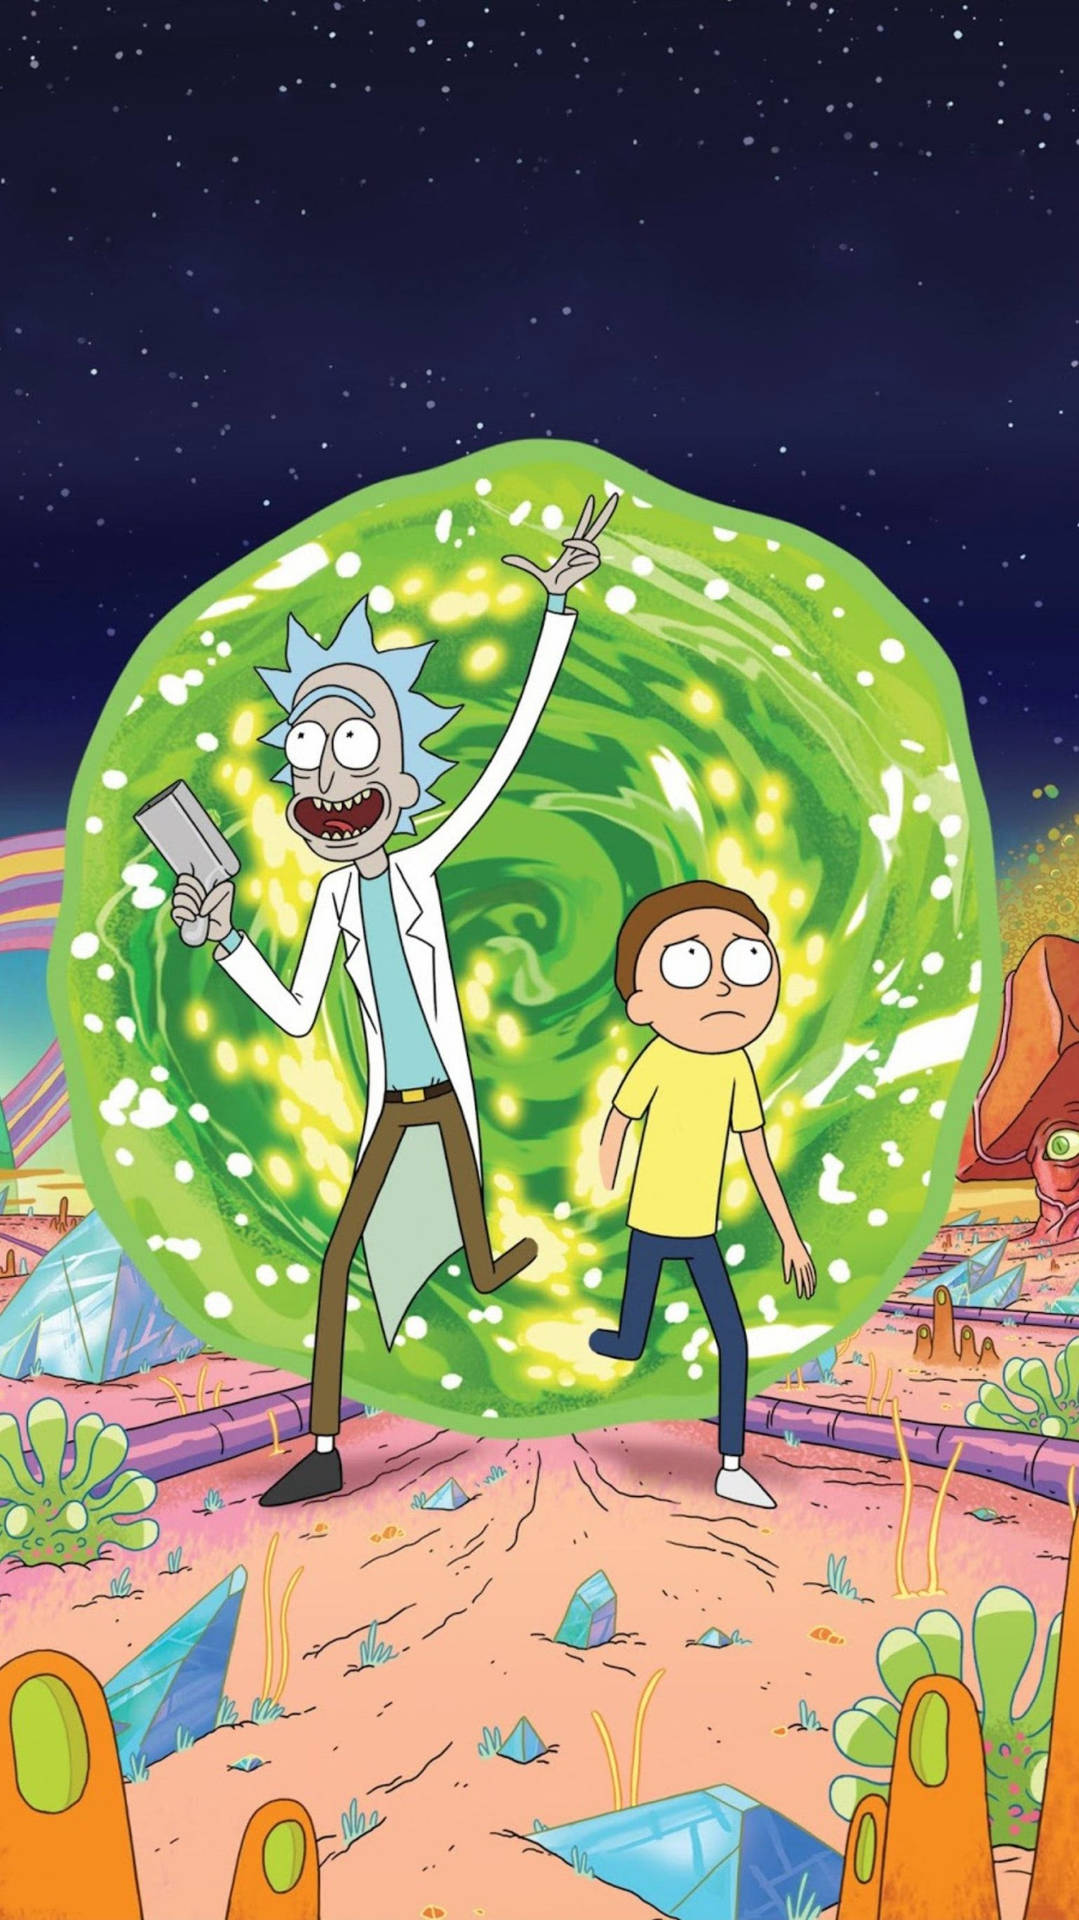 Free Rick And Morty Wallpaper Downloads, [400+] Rick And Morty Wallpapers  For Free | Wallpapers.Com